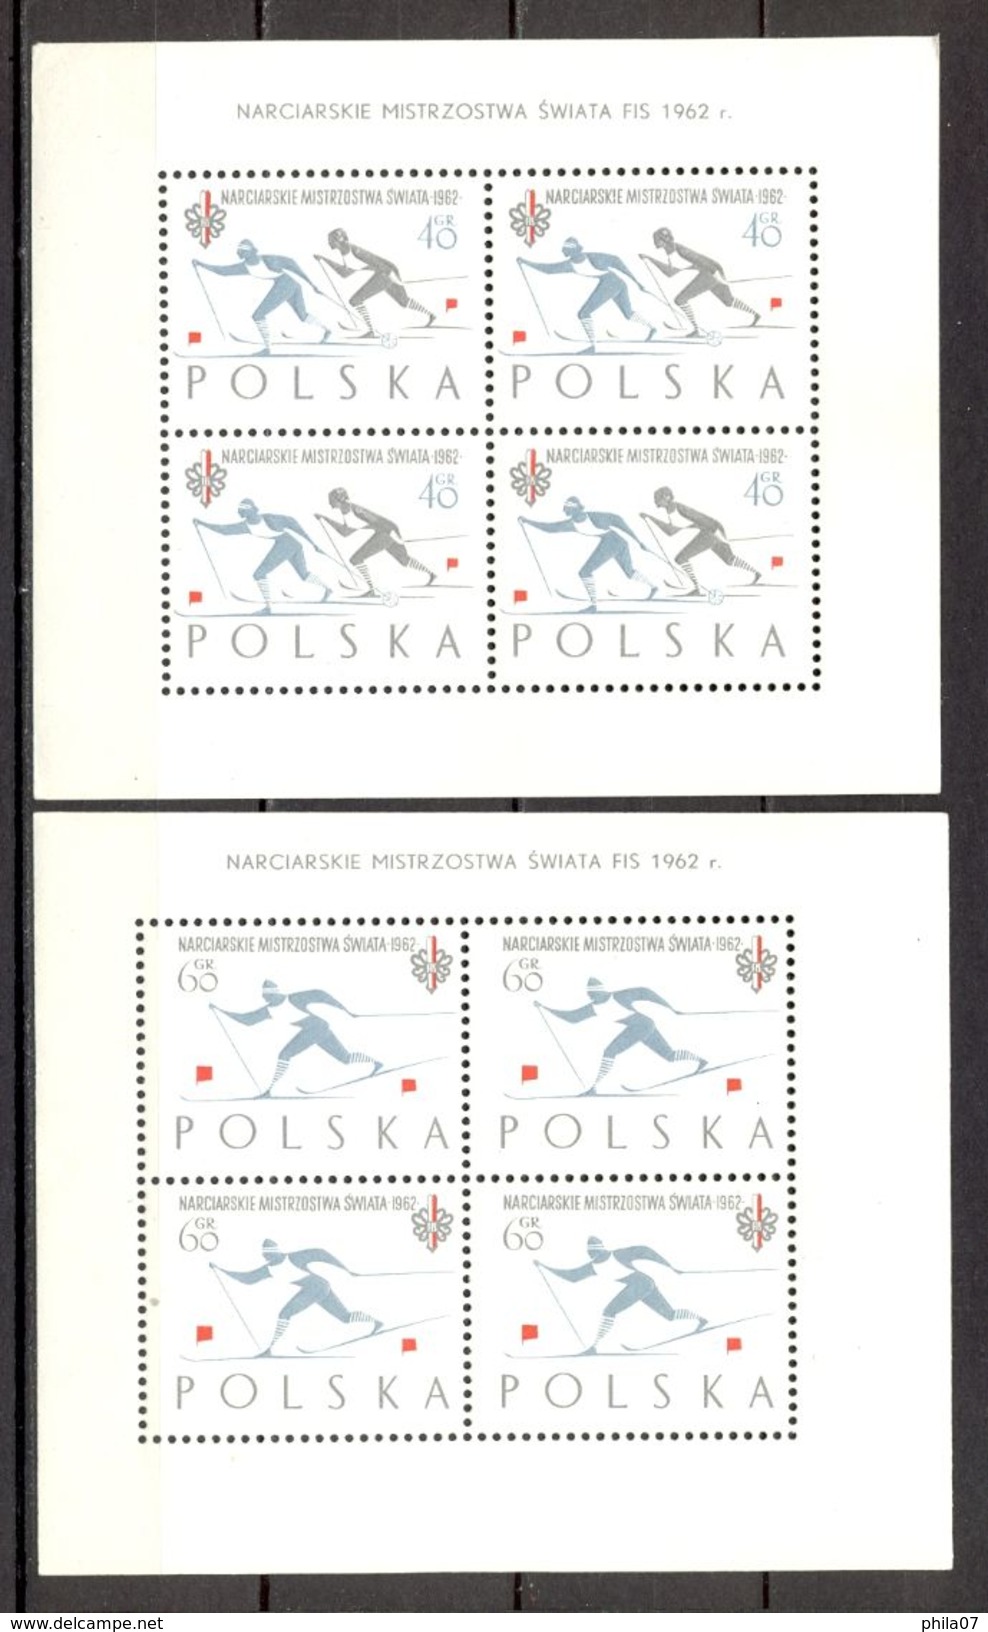 Poland - 1962, SWIATA FIS, Two Blocks, Sheet And Series, All MNH. / See Scans, 5 Scans - Nuevos